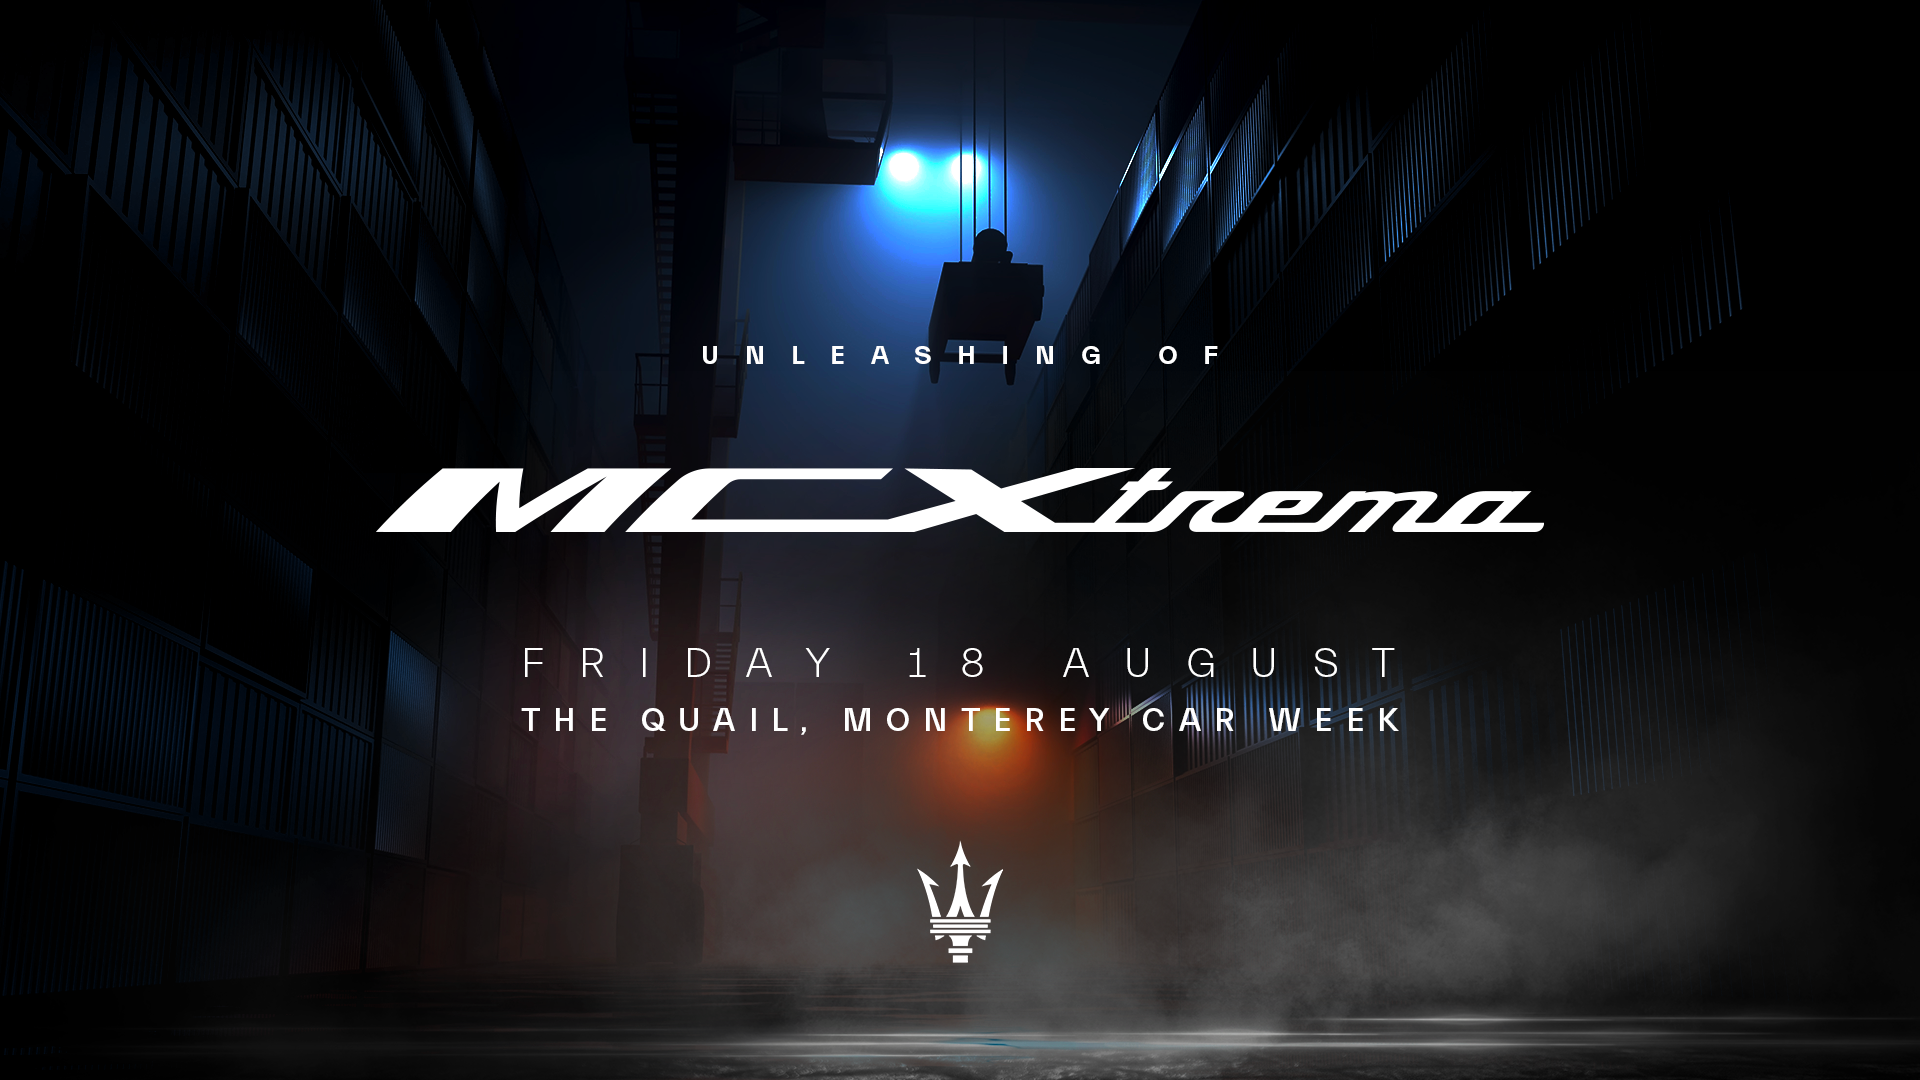 A promotional image for the unveiling of the Maserati MCXtrema racecar